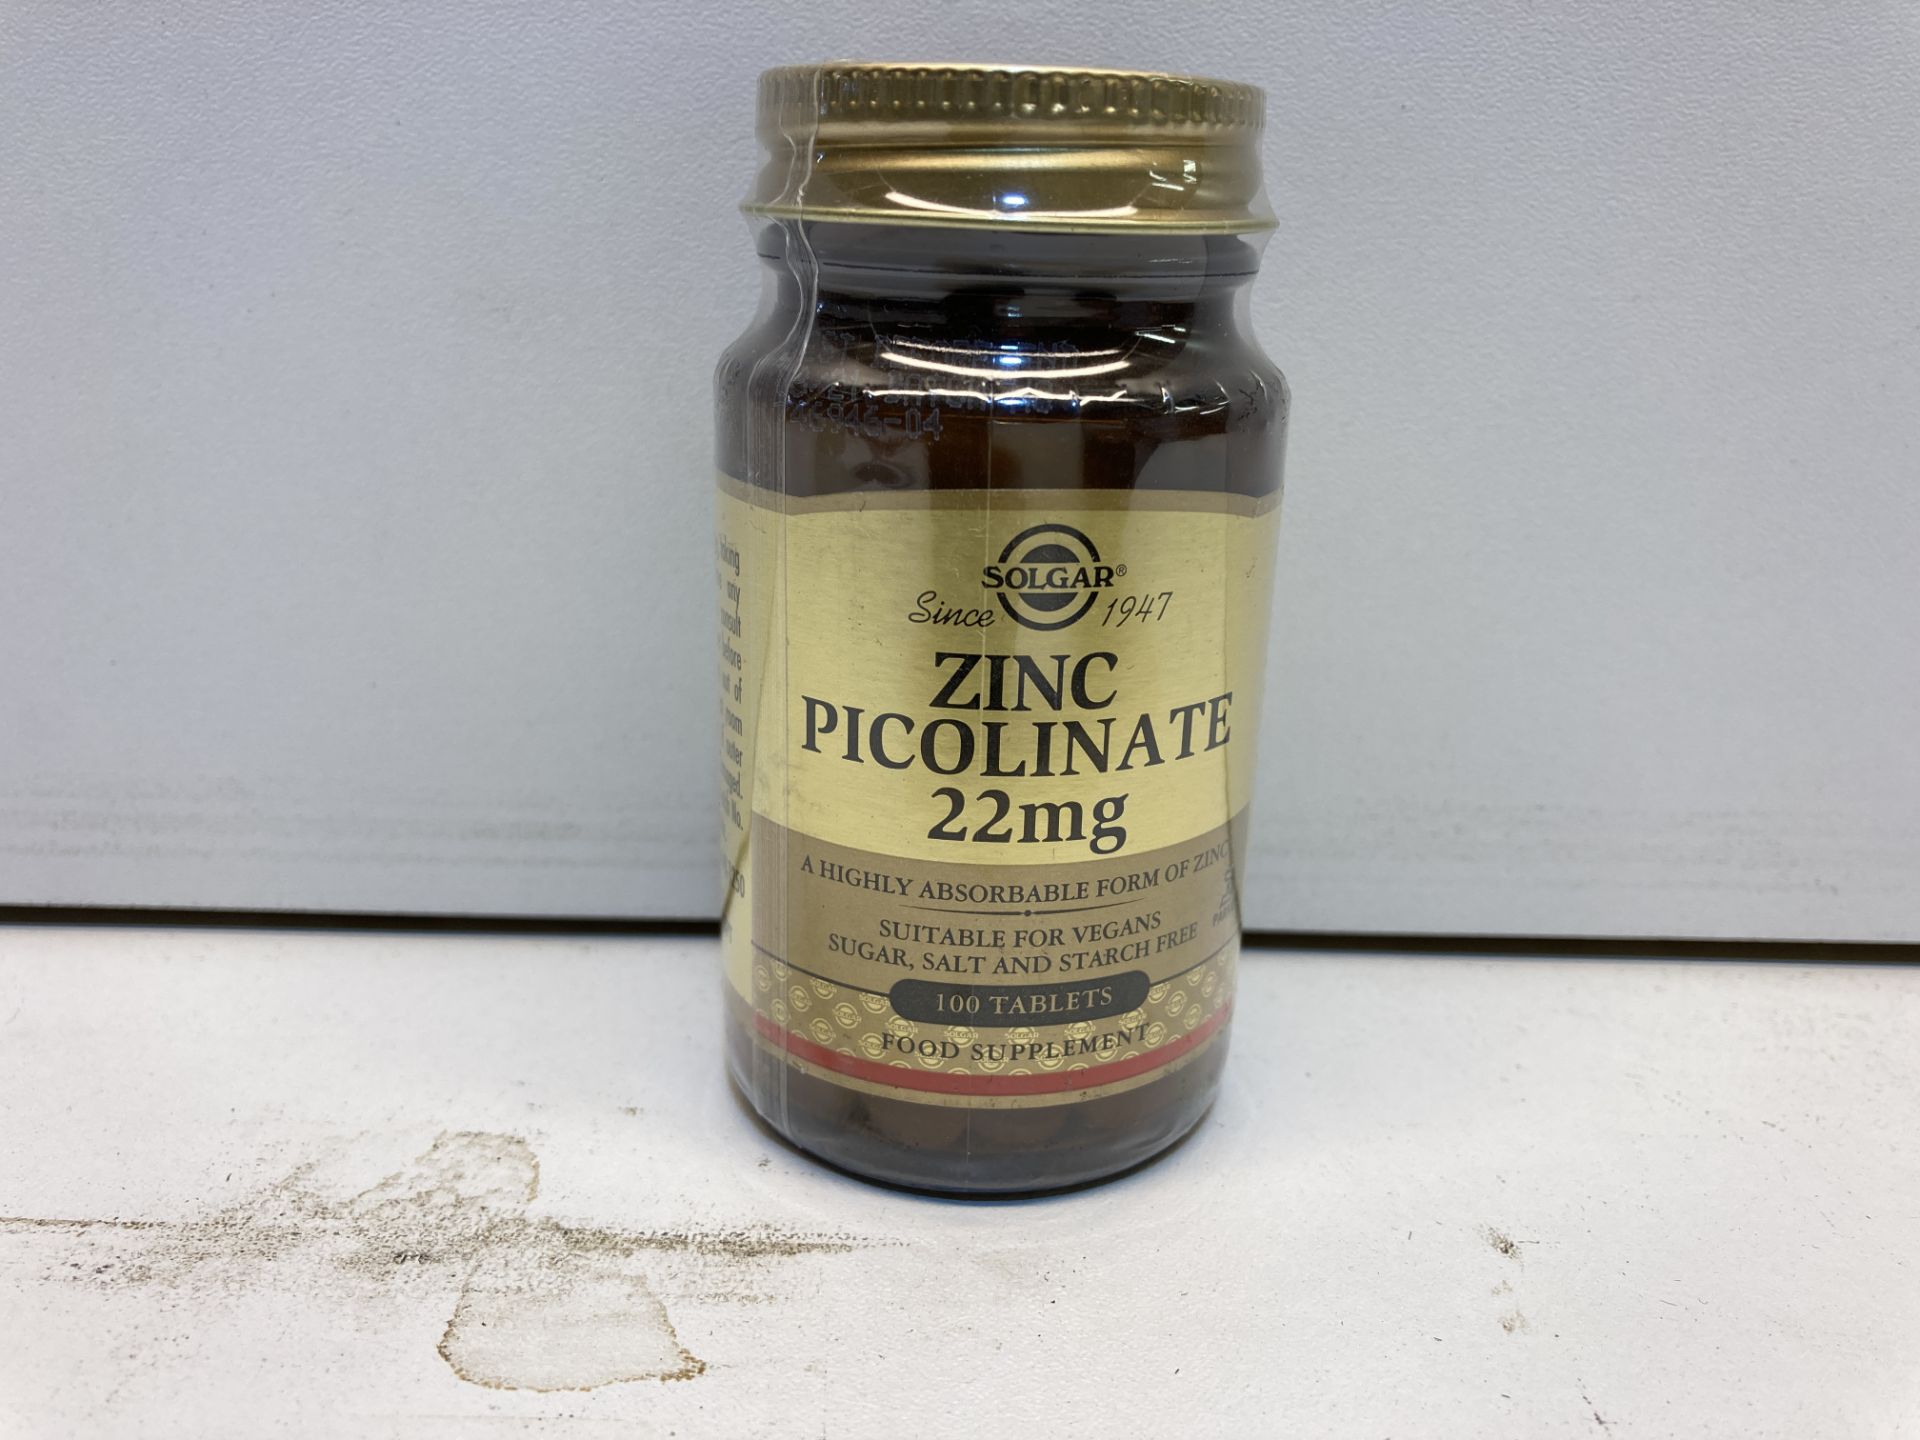 10 x Bottles of Zinc Picolinate 22mg Tablets | Total RRP £100 - Image 2 of 4